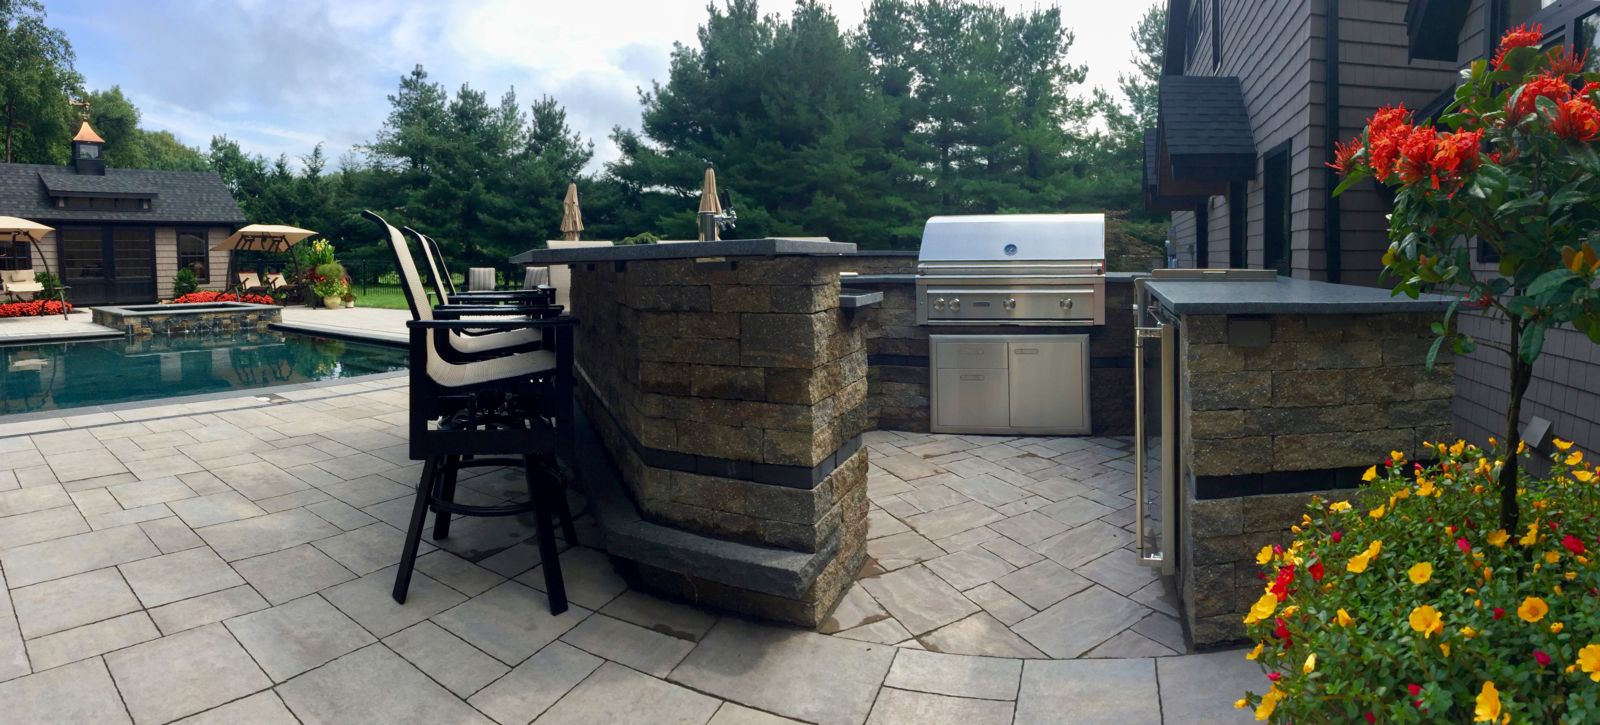 8 Must-Have Features for Your Farmington, CT, Outdoor Kitchen